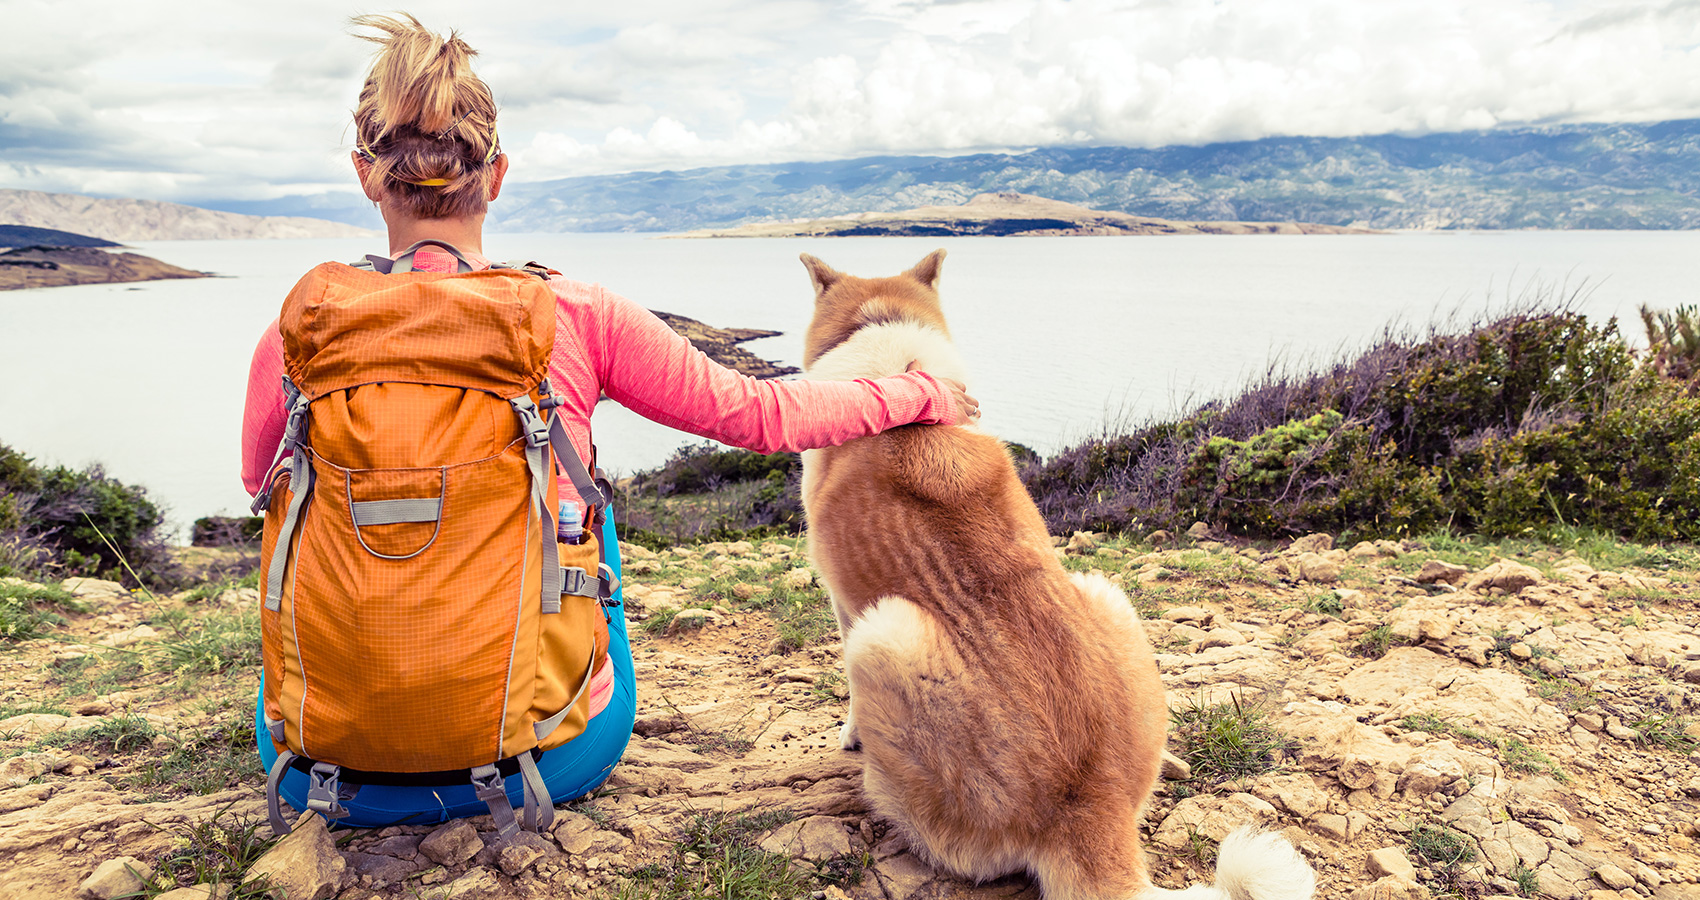 Our 3 Favorite Family (and Dog!) Friendly Hikes